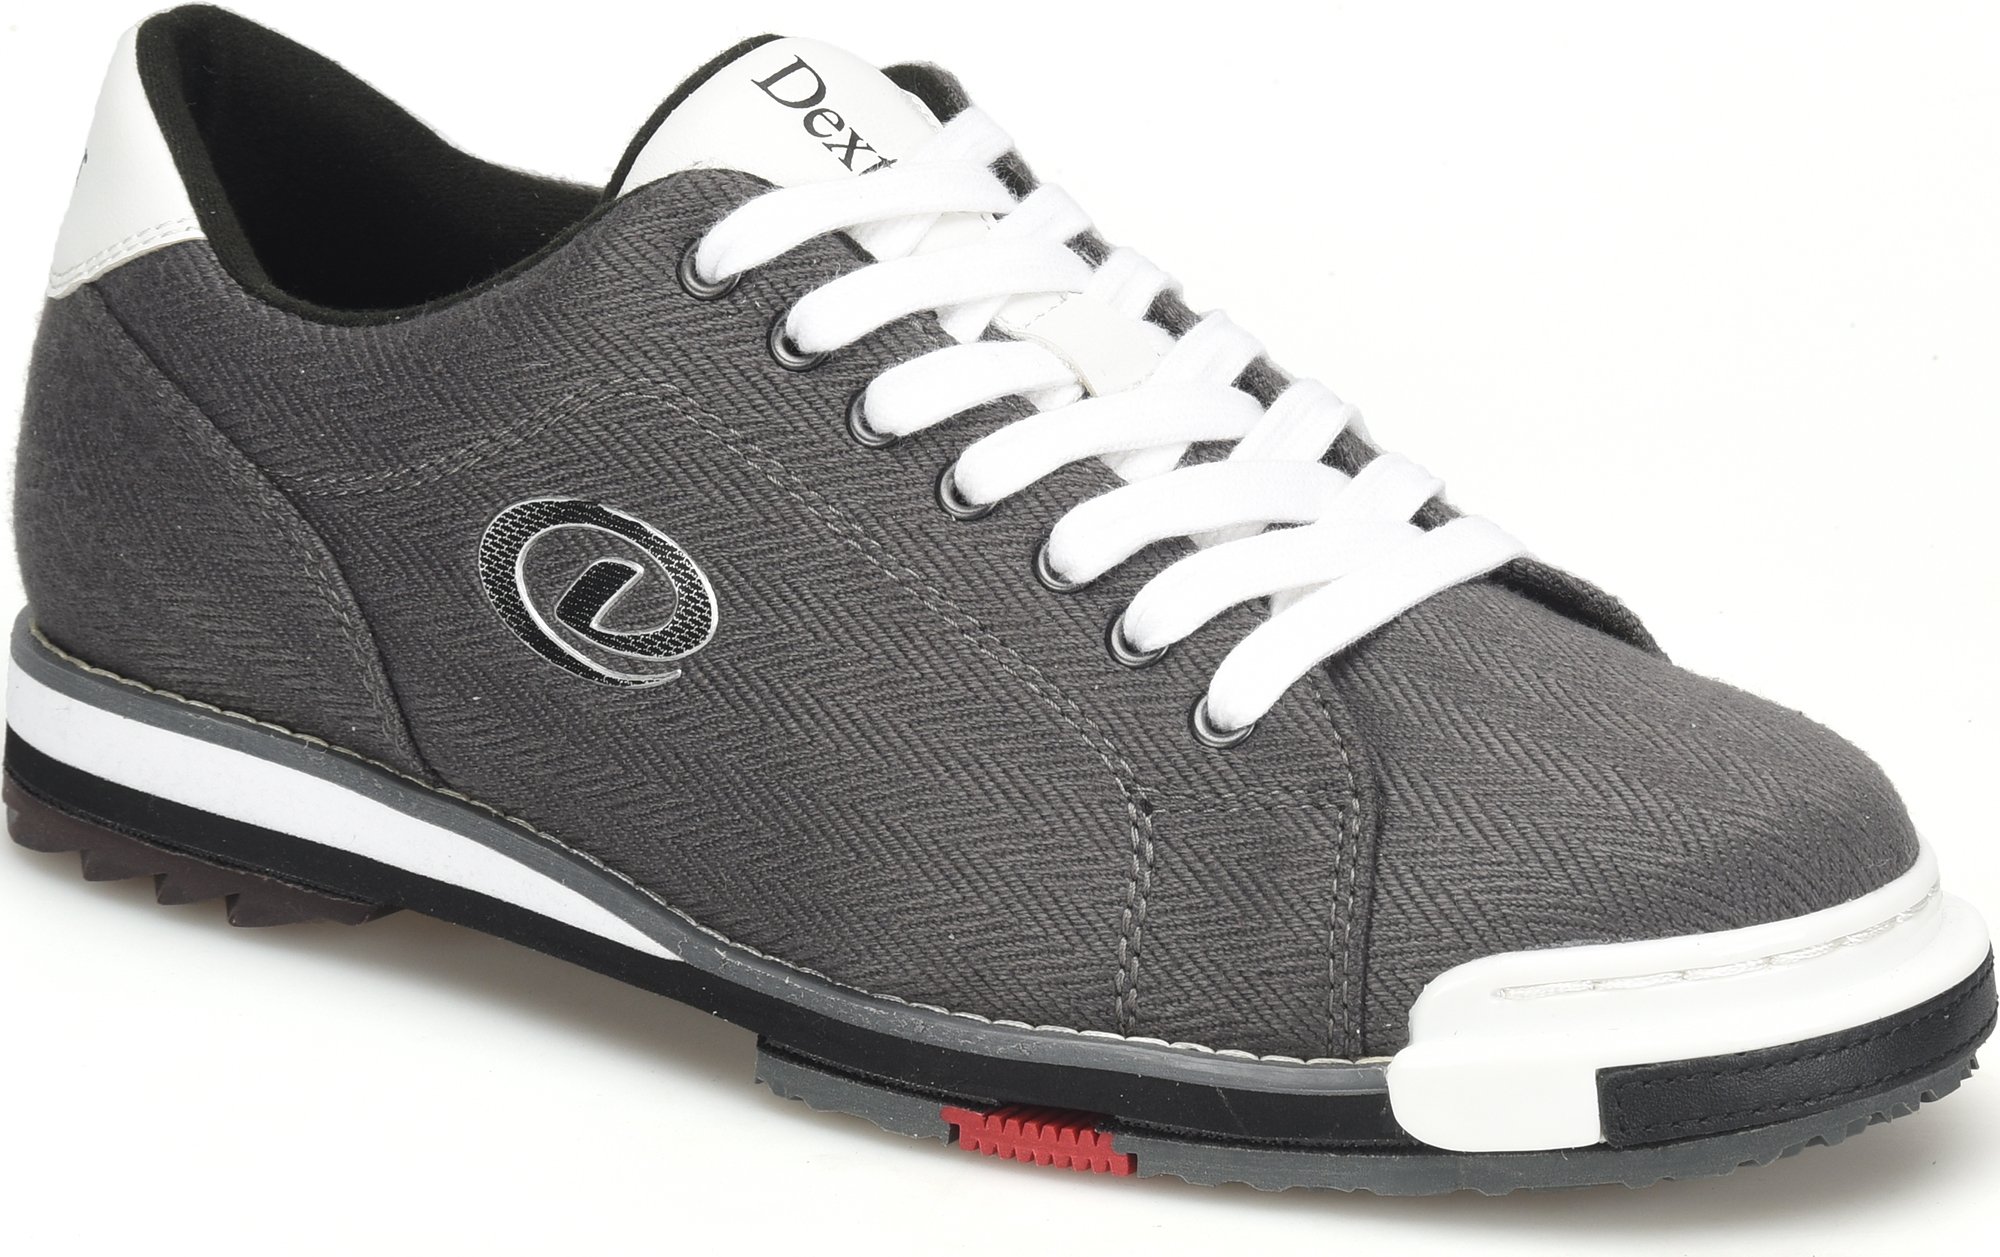 Dexter Mens SST 8 Knit Charcoal Bowling Shoes + FREE SHIPPING